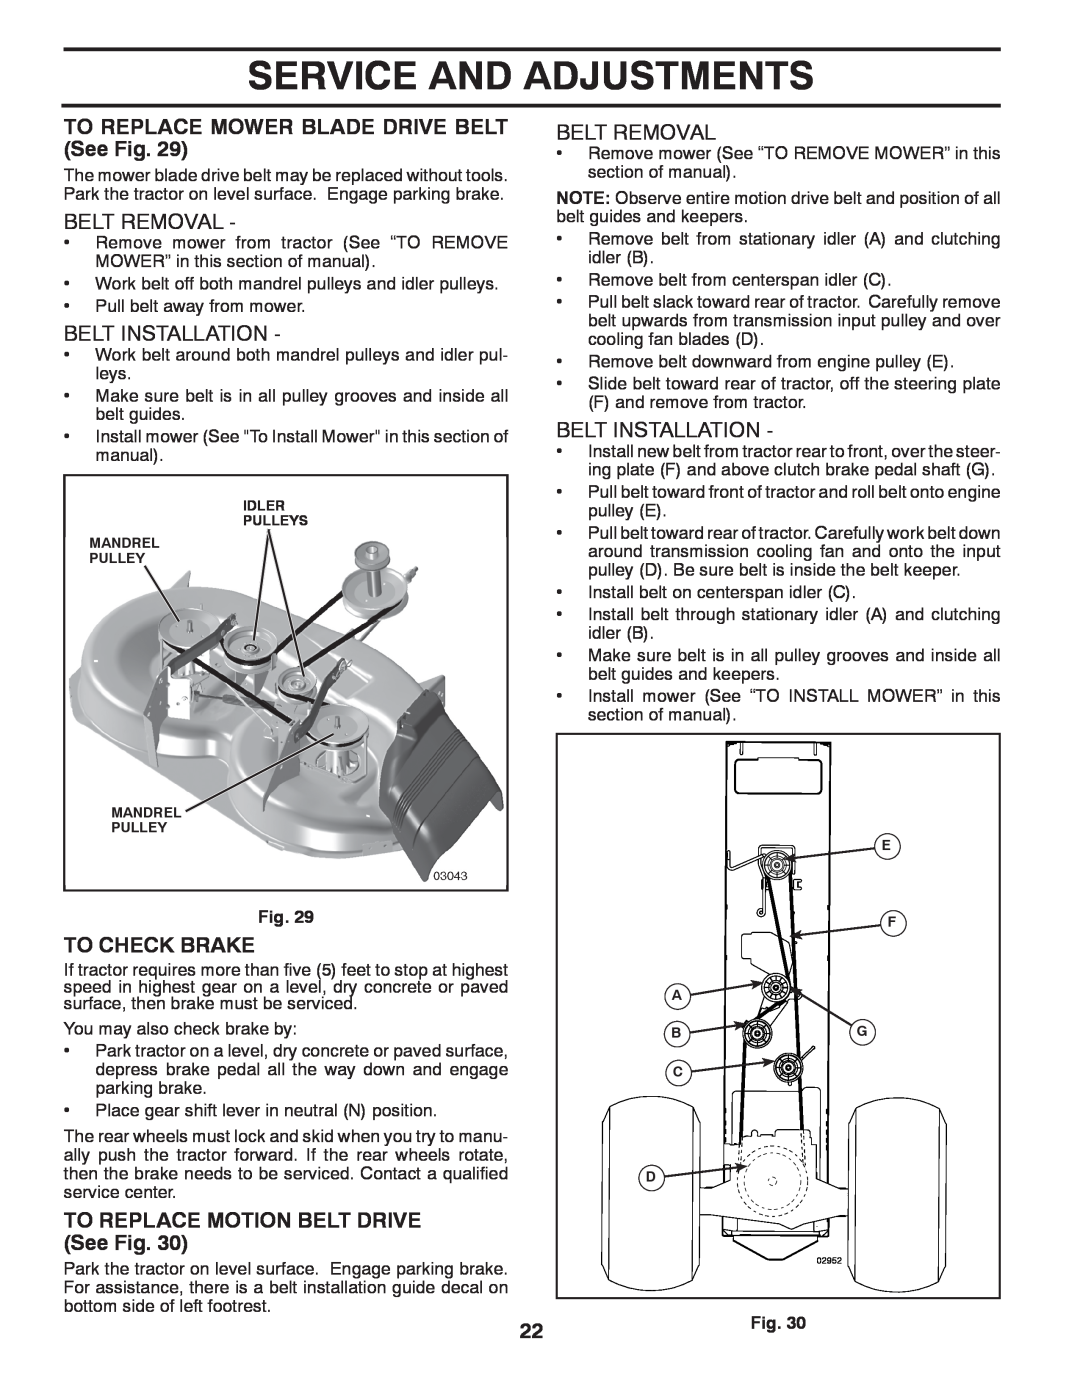 Poulan PP18542 owner manual TO REPLACE MOWER BLADE DRIVE BELT See Fig, To Check Brake, TO REPLACE MOTION BELT DRIVE See Fig 